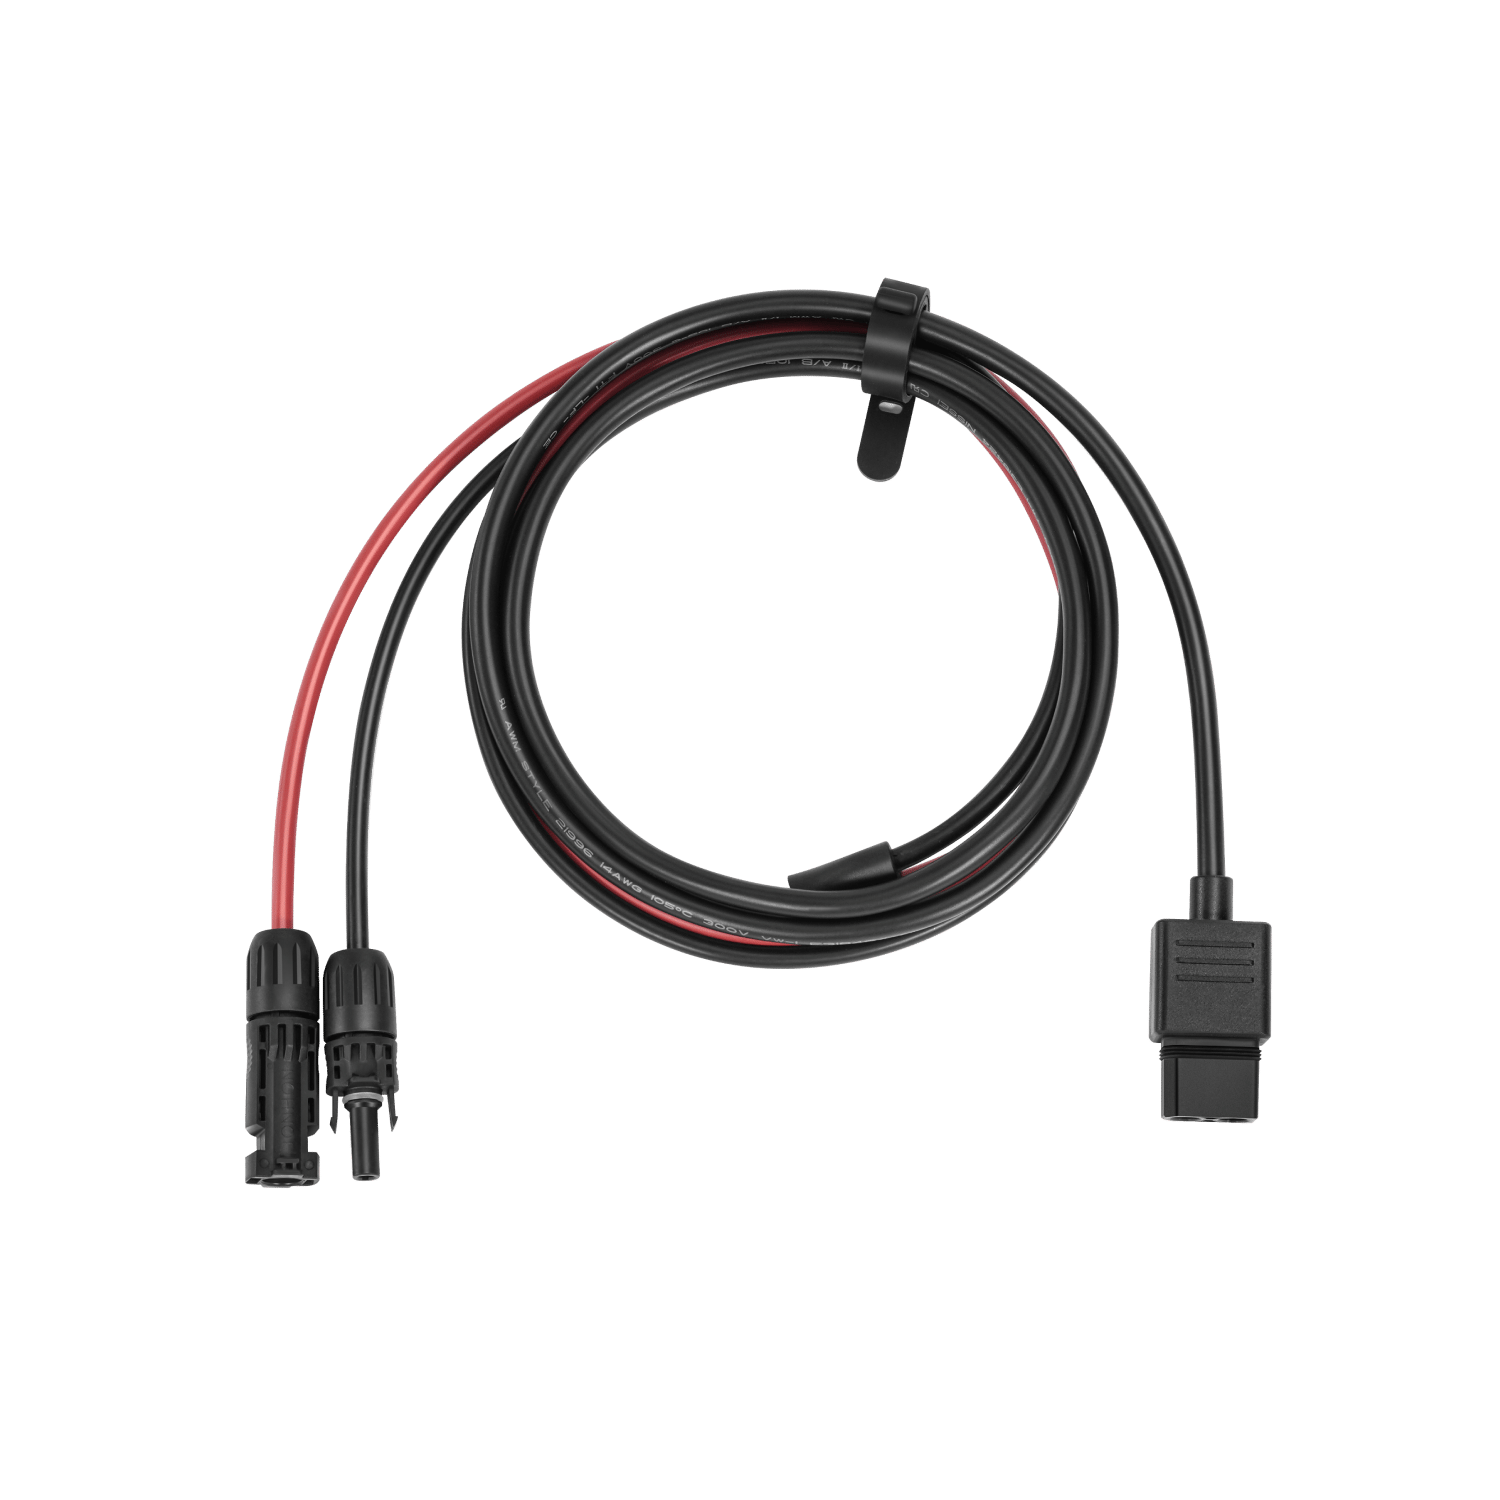 EcoFlow Solar to Low-PV Port Charging Cable （EcoFlow DELTA Pro Ultra)